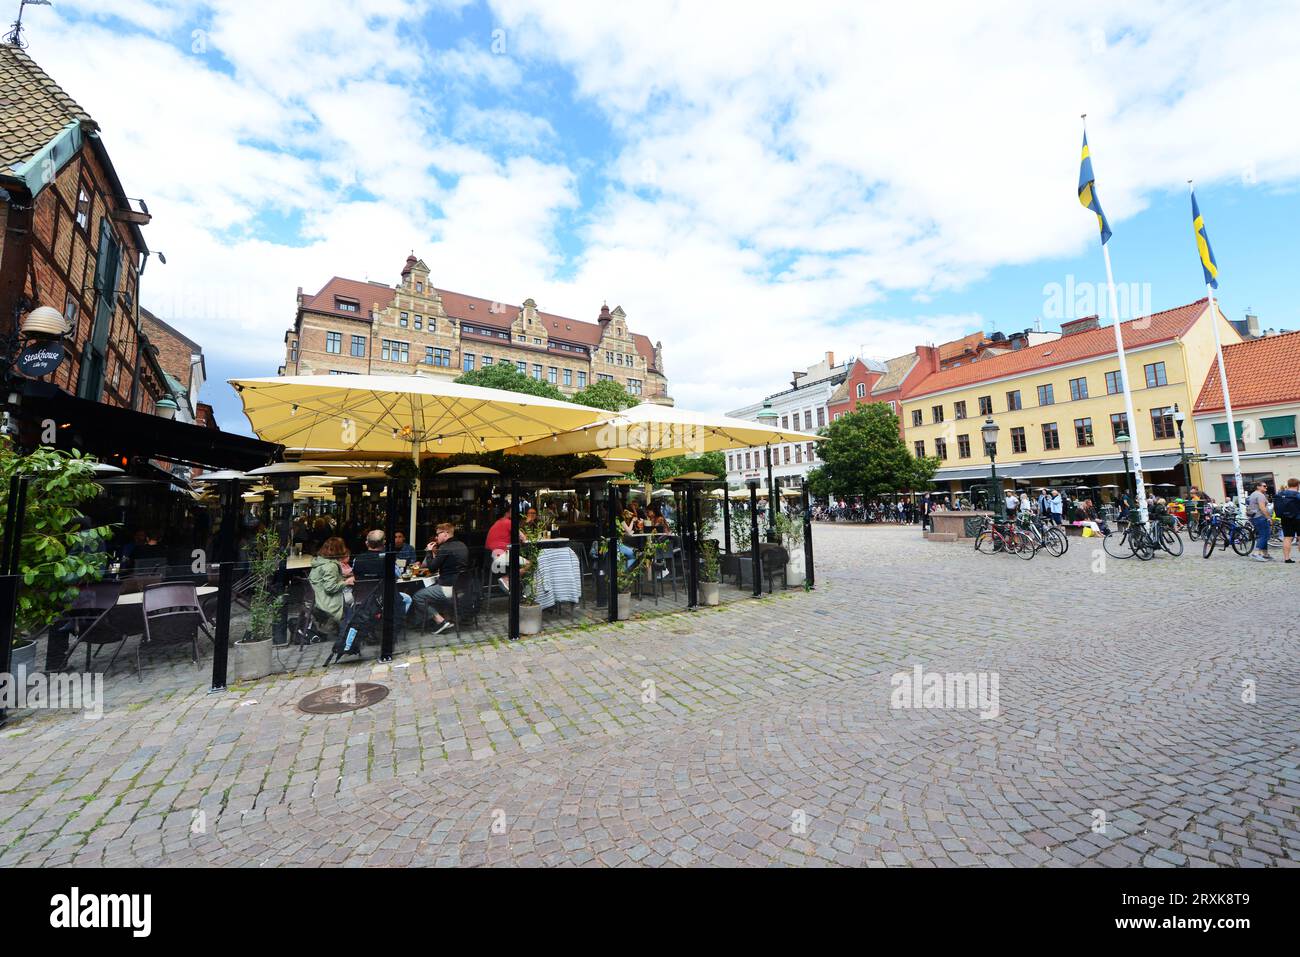 cafs-and-restaurants-at-the-lilla-torg-old-town-square-in-the-old-city-of-malm-sweden-2RXK8T9.jpg